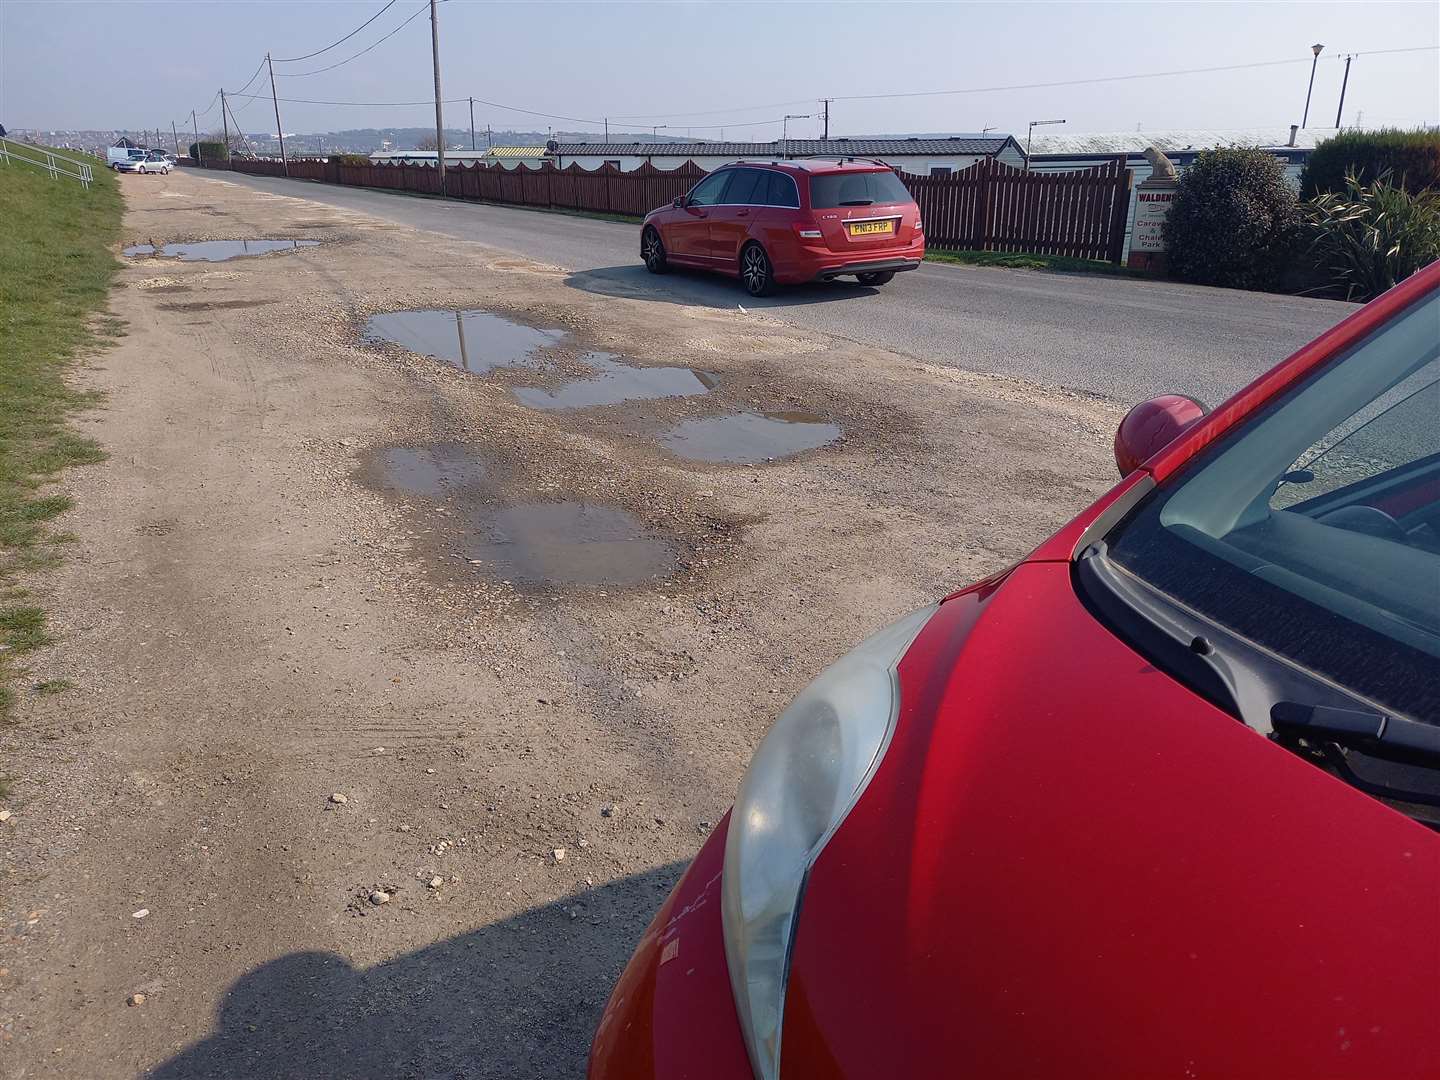 The car park was recently repaired by the council, yet scores of potholes remain